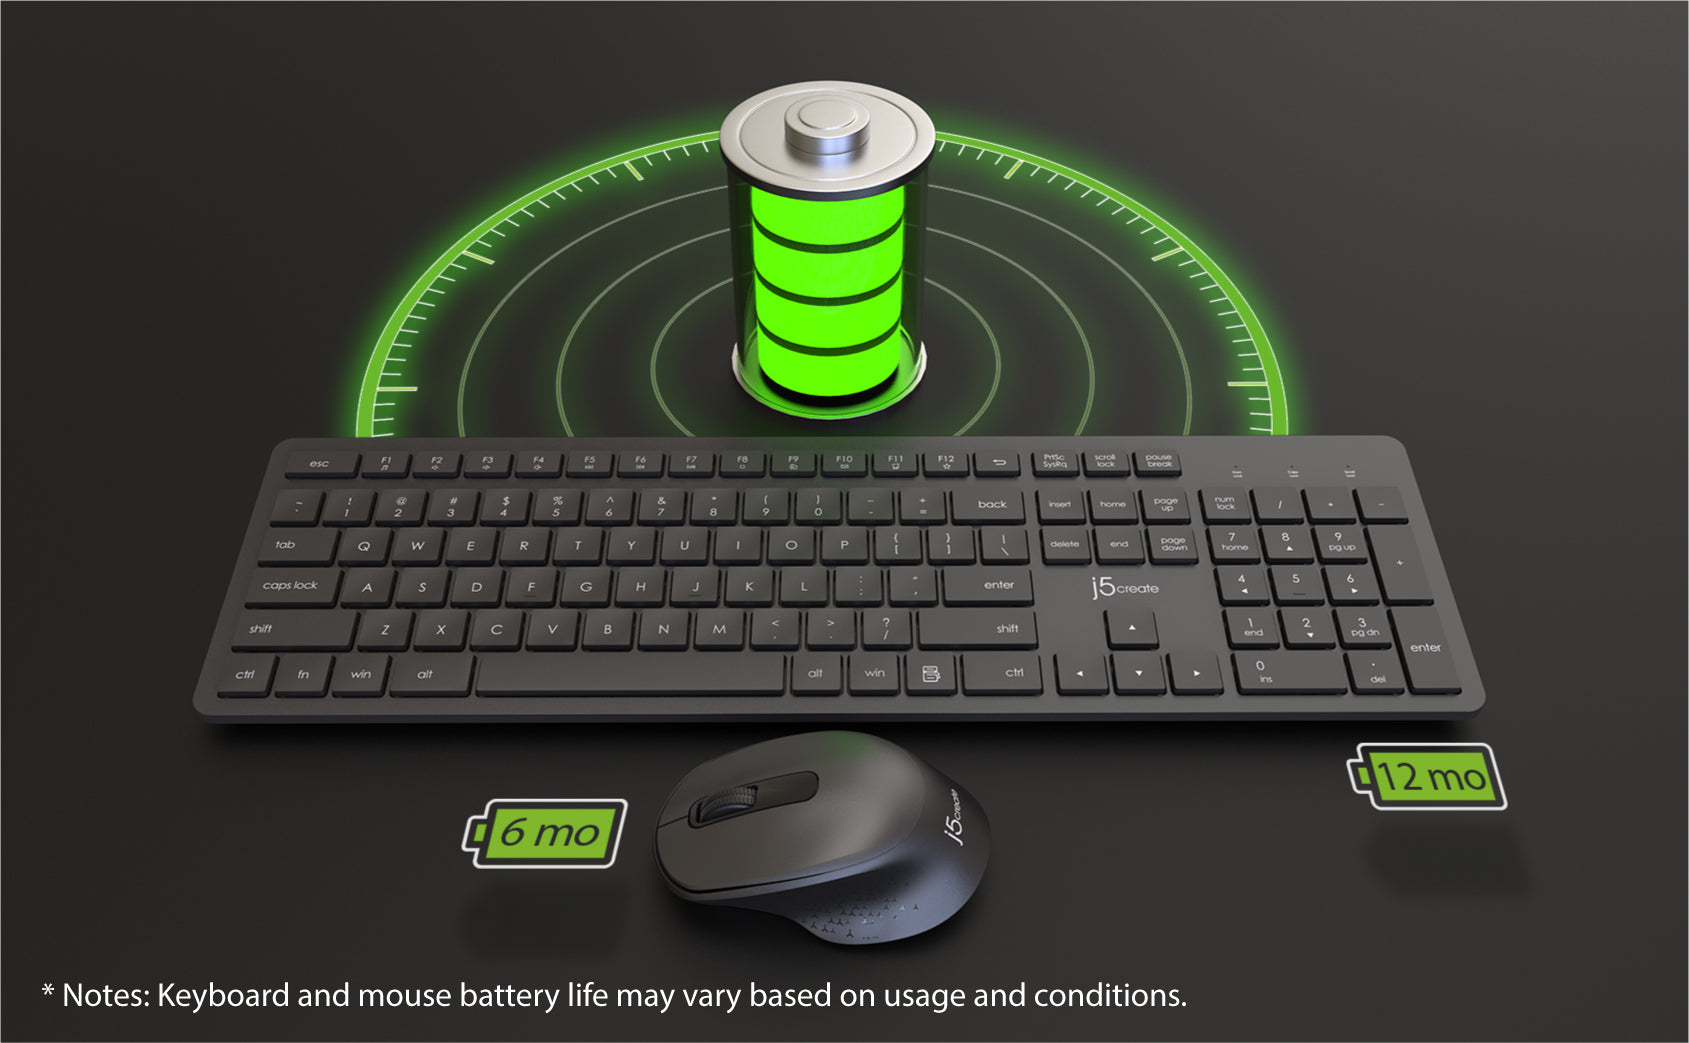 Learn About: Mouse (and trackpad and tablet) Training with JiJi